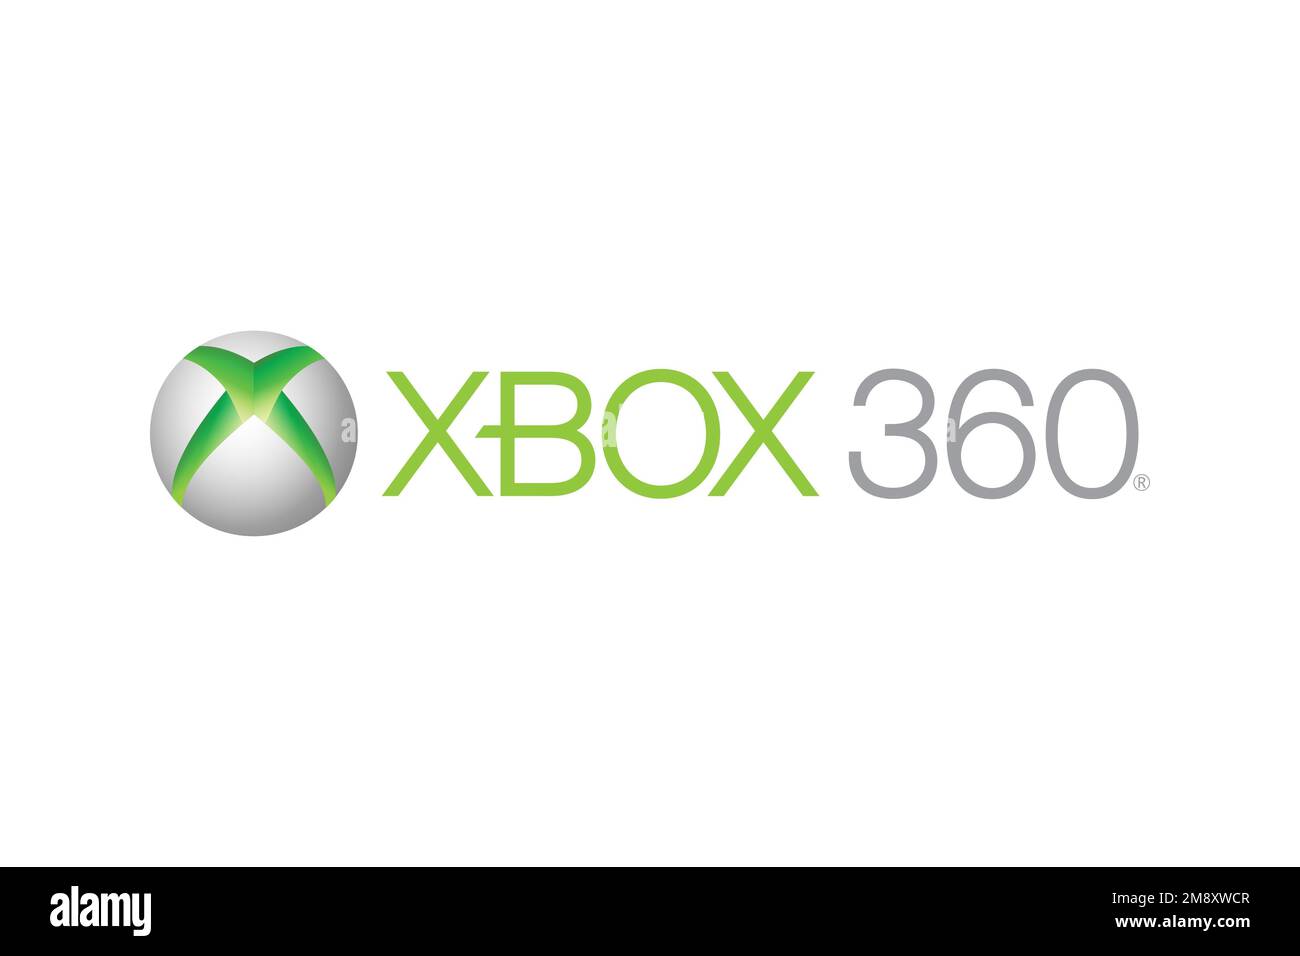 Xbox 360 logo Cut Out Stock Images & Pictures - Alamy